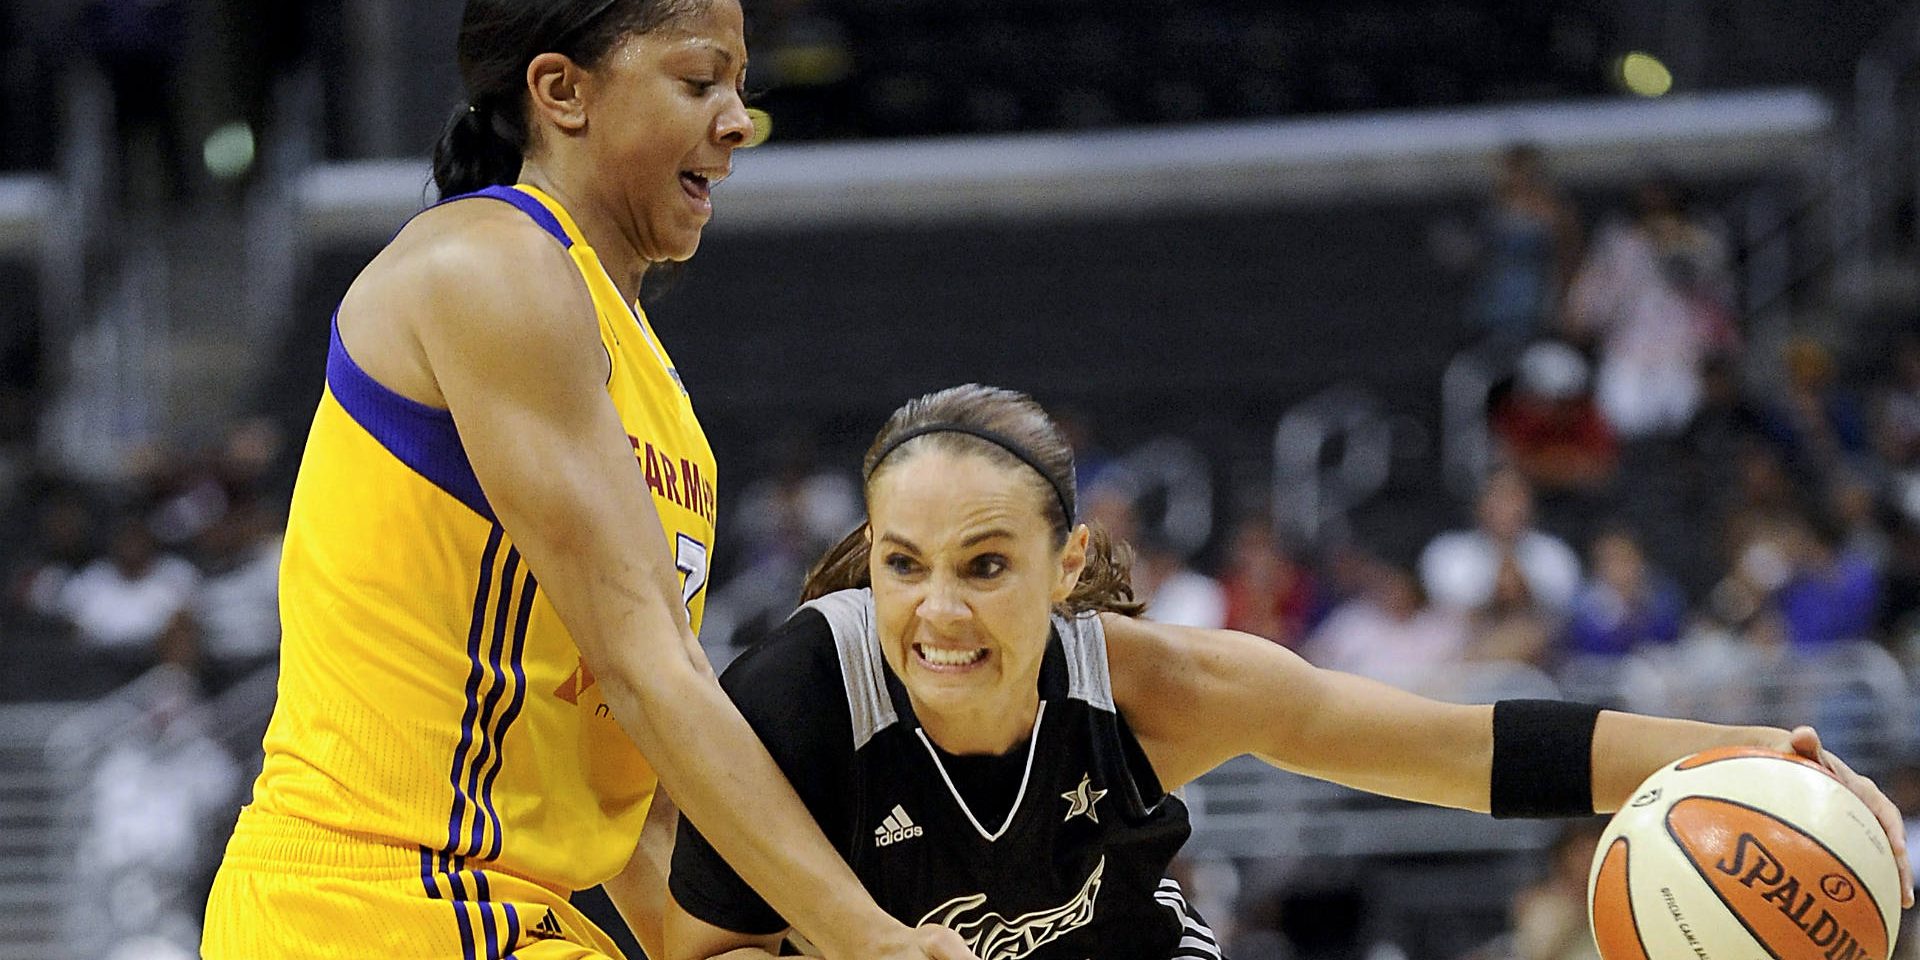 How good was Becky Hammon? The ground-breaking Aces, Spurs coach was also an elite WNBA player